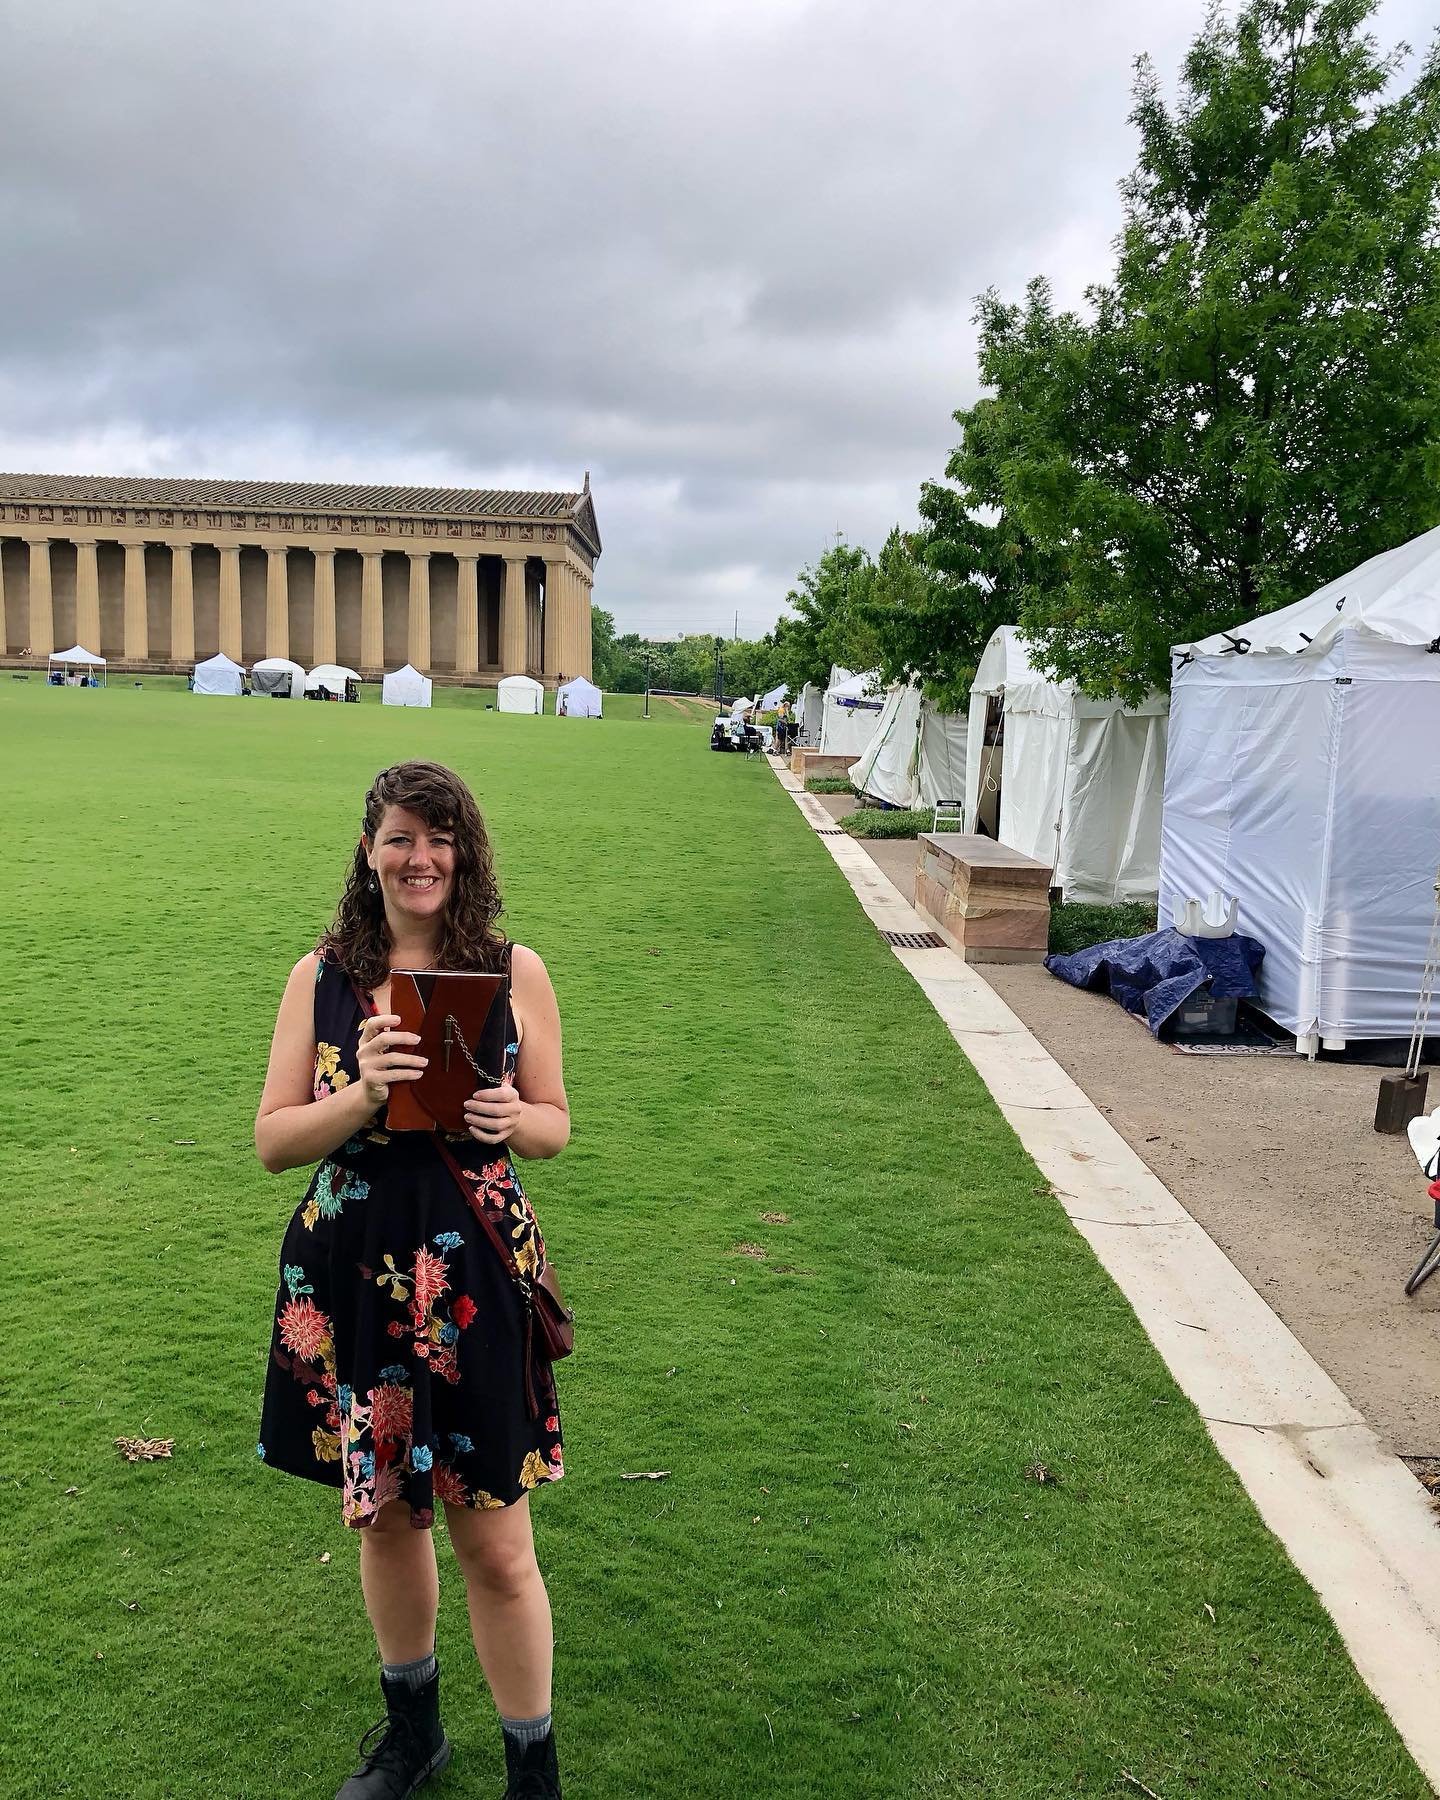 Day 2 at the @tennesseecraft spring fair! We&rsquo;re here at Centennial Park next to the Parthenon. I&rsquo;m in booth B77. We&rsquo;re open Saturday 10-6 and Sunday 10-5. Come join us!